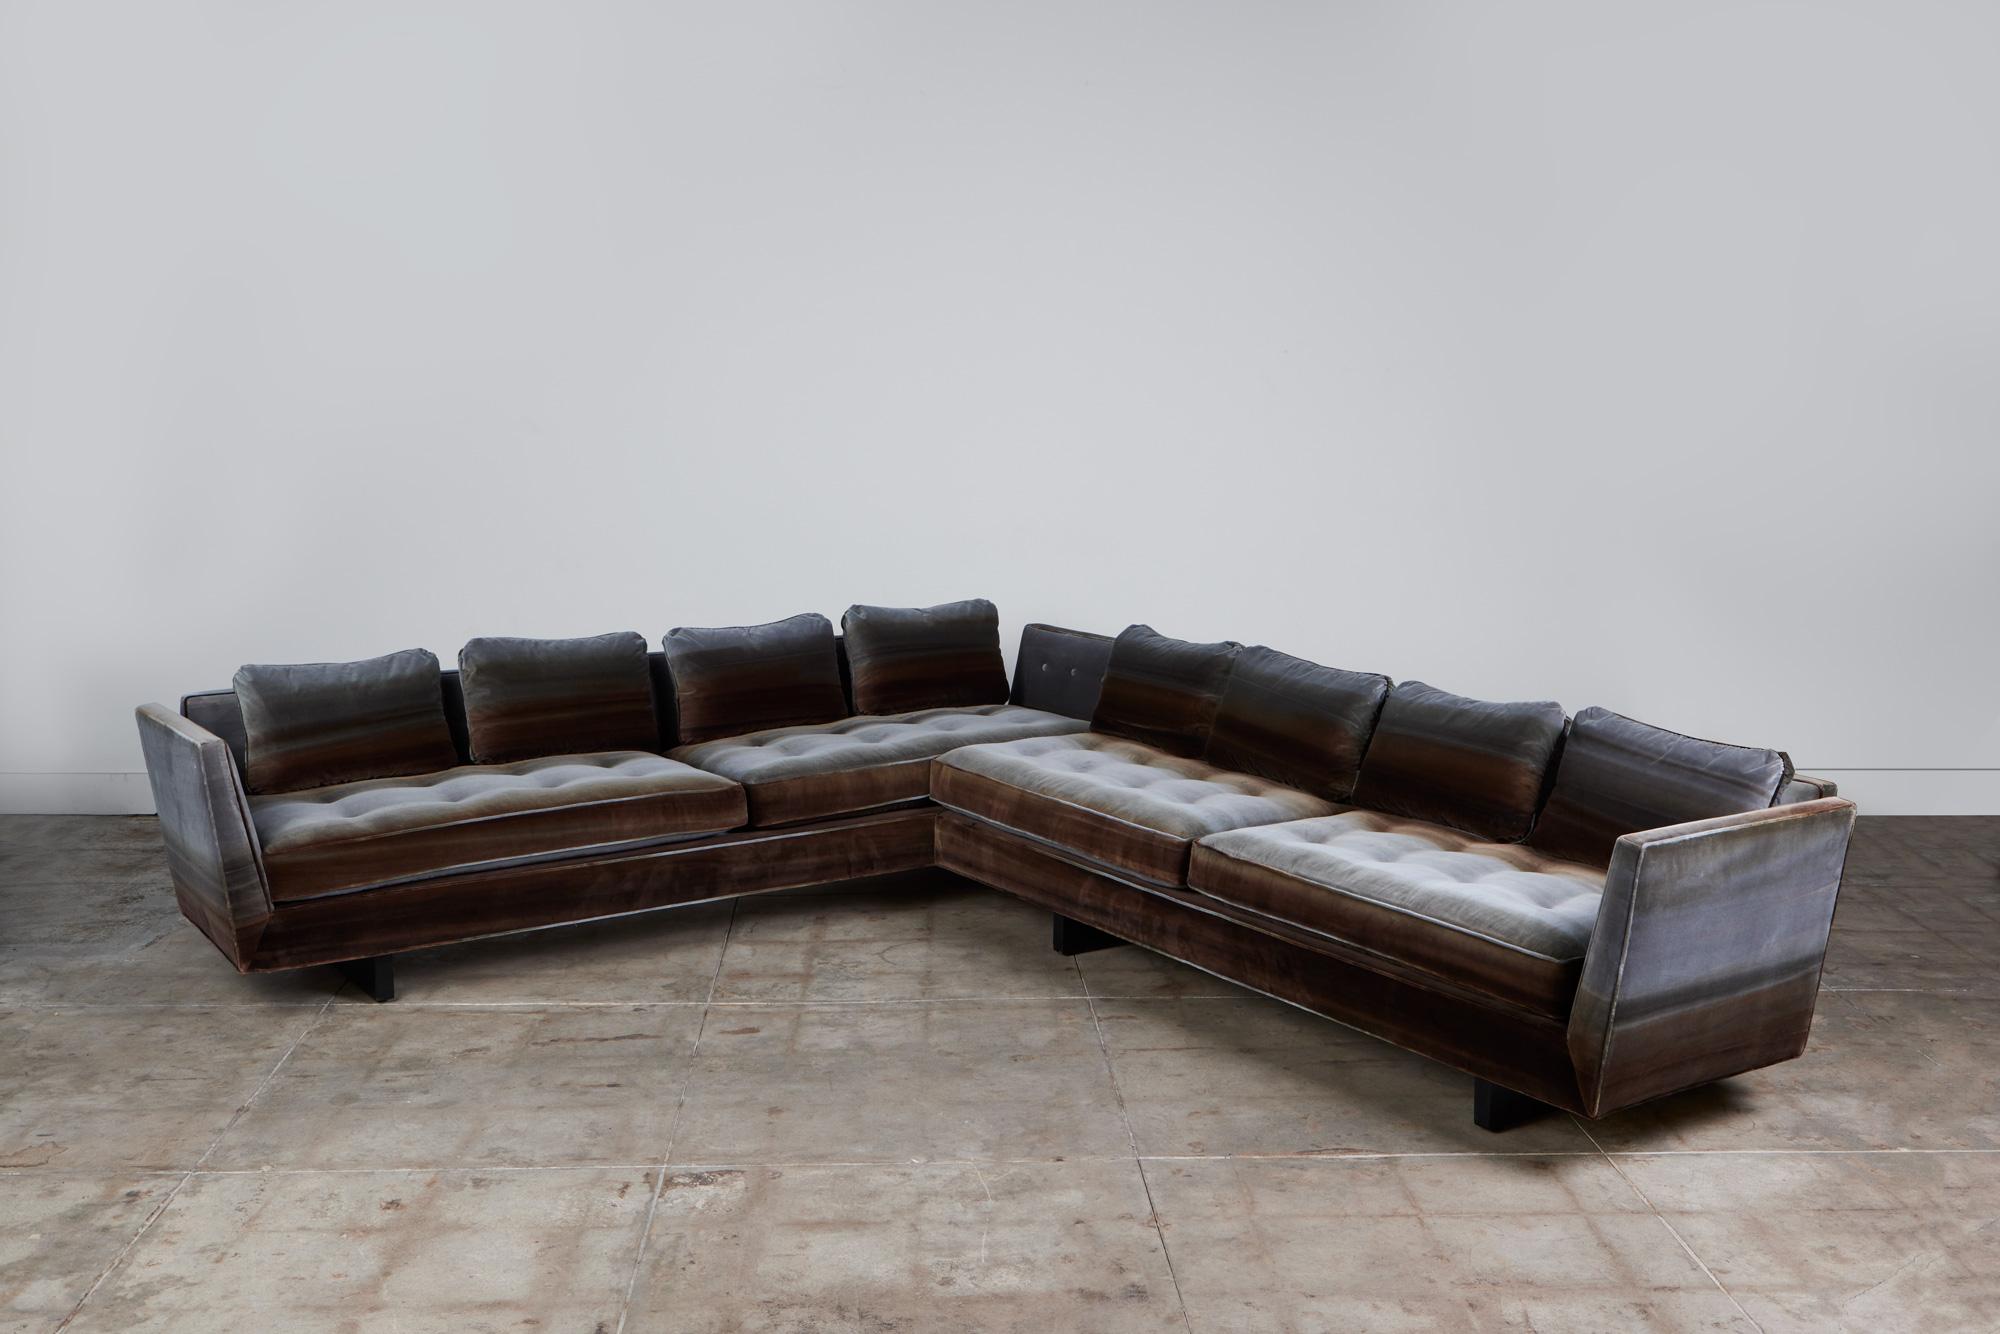 Edward Wormley for Dunbar, c.1960s, USA, two-piece sectional sofa. The sofa features split arm rests and an exposed sculpted ebonized wood frame. This sofa has been fully reupholstered in the luscious Métaphores artisanal dyed Saint Germain velvet.